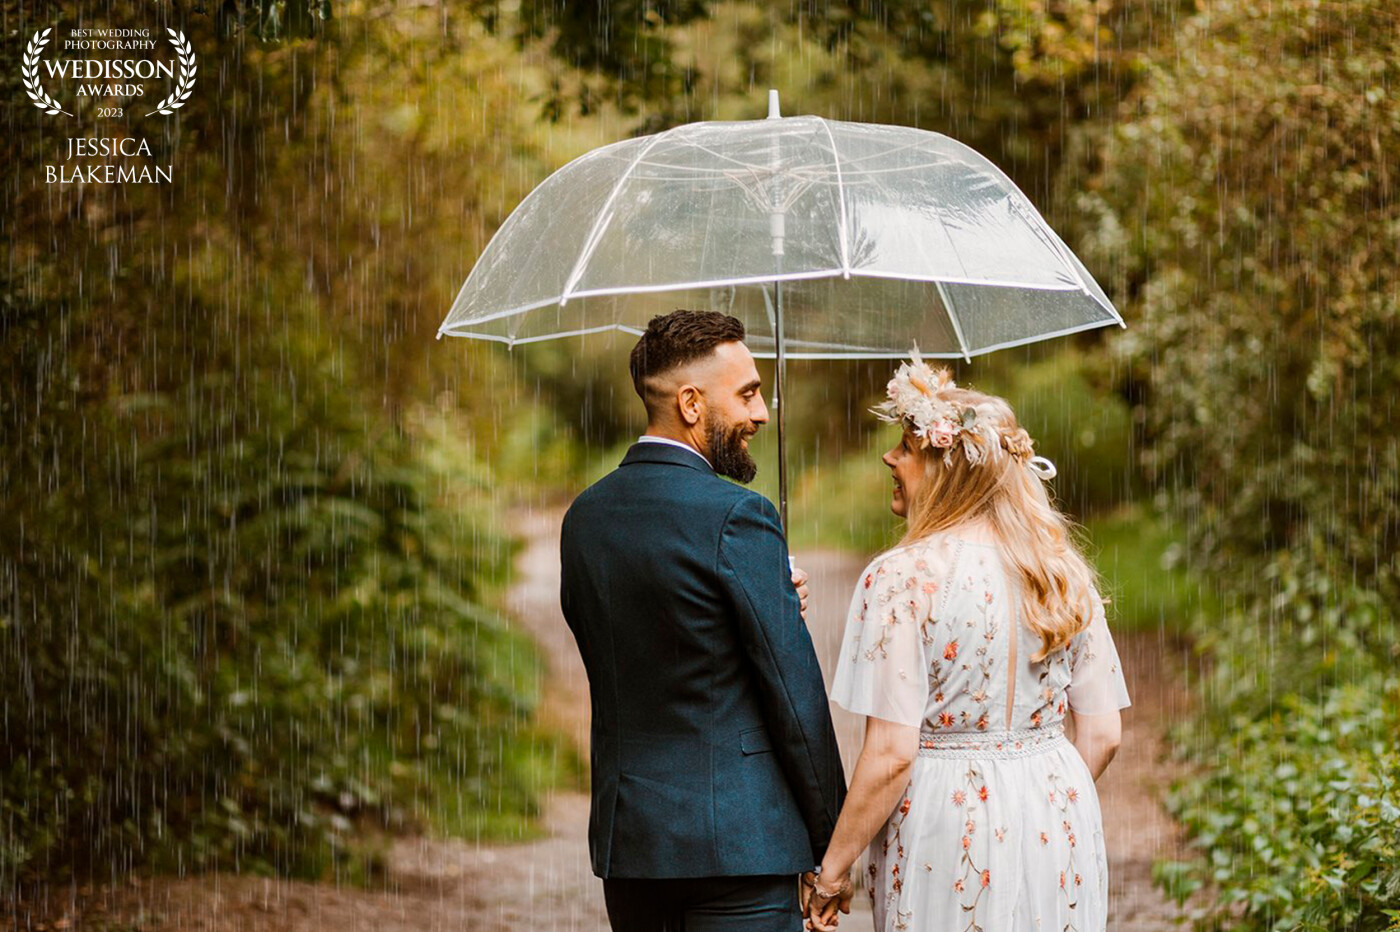 A rainy "Just married" Stroll for Rami and Lydia